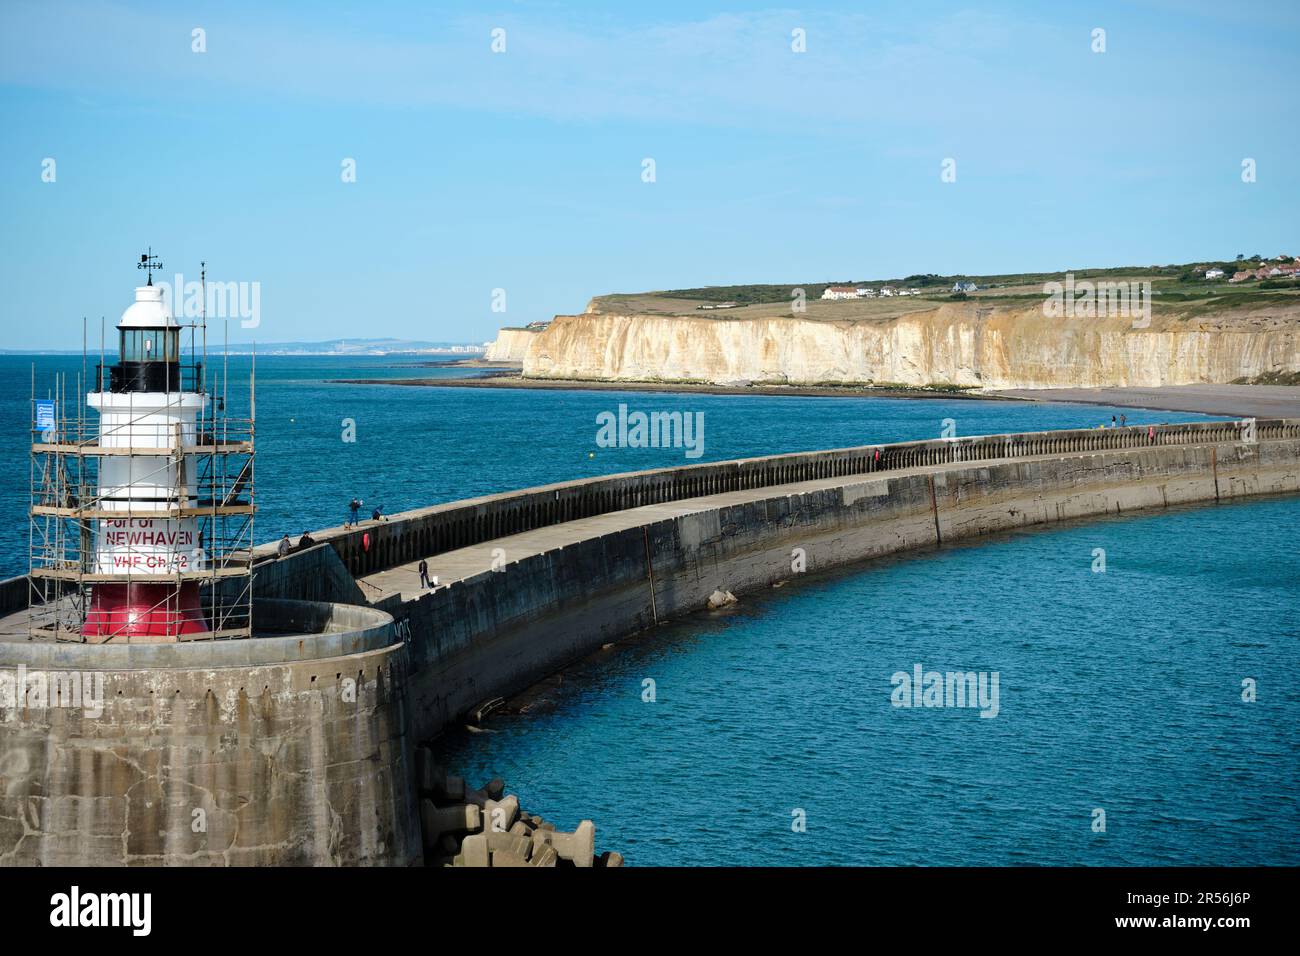 Newhaven, East Sussex, United Kingdom - September 18th 2022: Scaffolding around the lighthouse for repainting. Sunny with clear blue sky and water. Wh Stock Photo